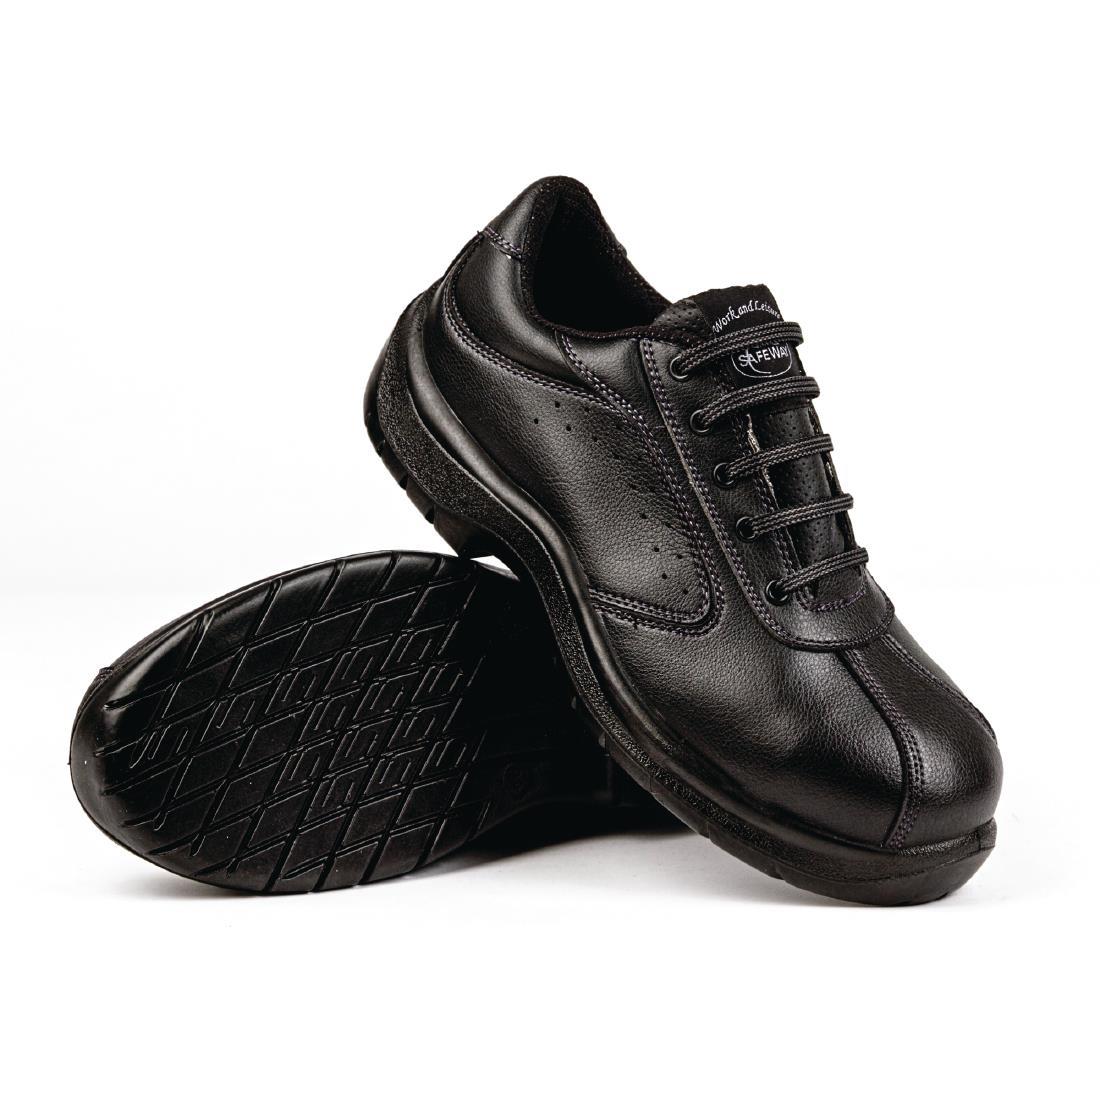 Slipbuster Side Perforated Lace Up Black 42